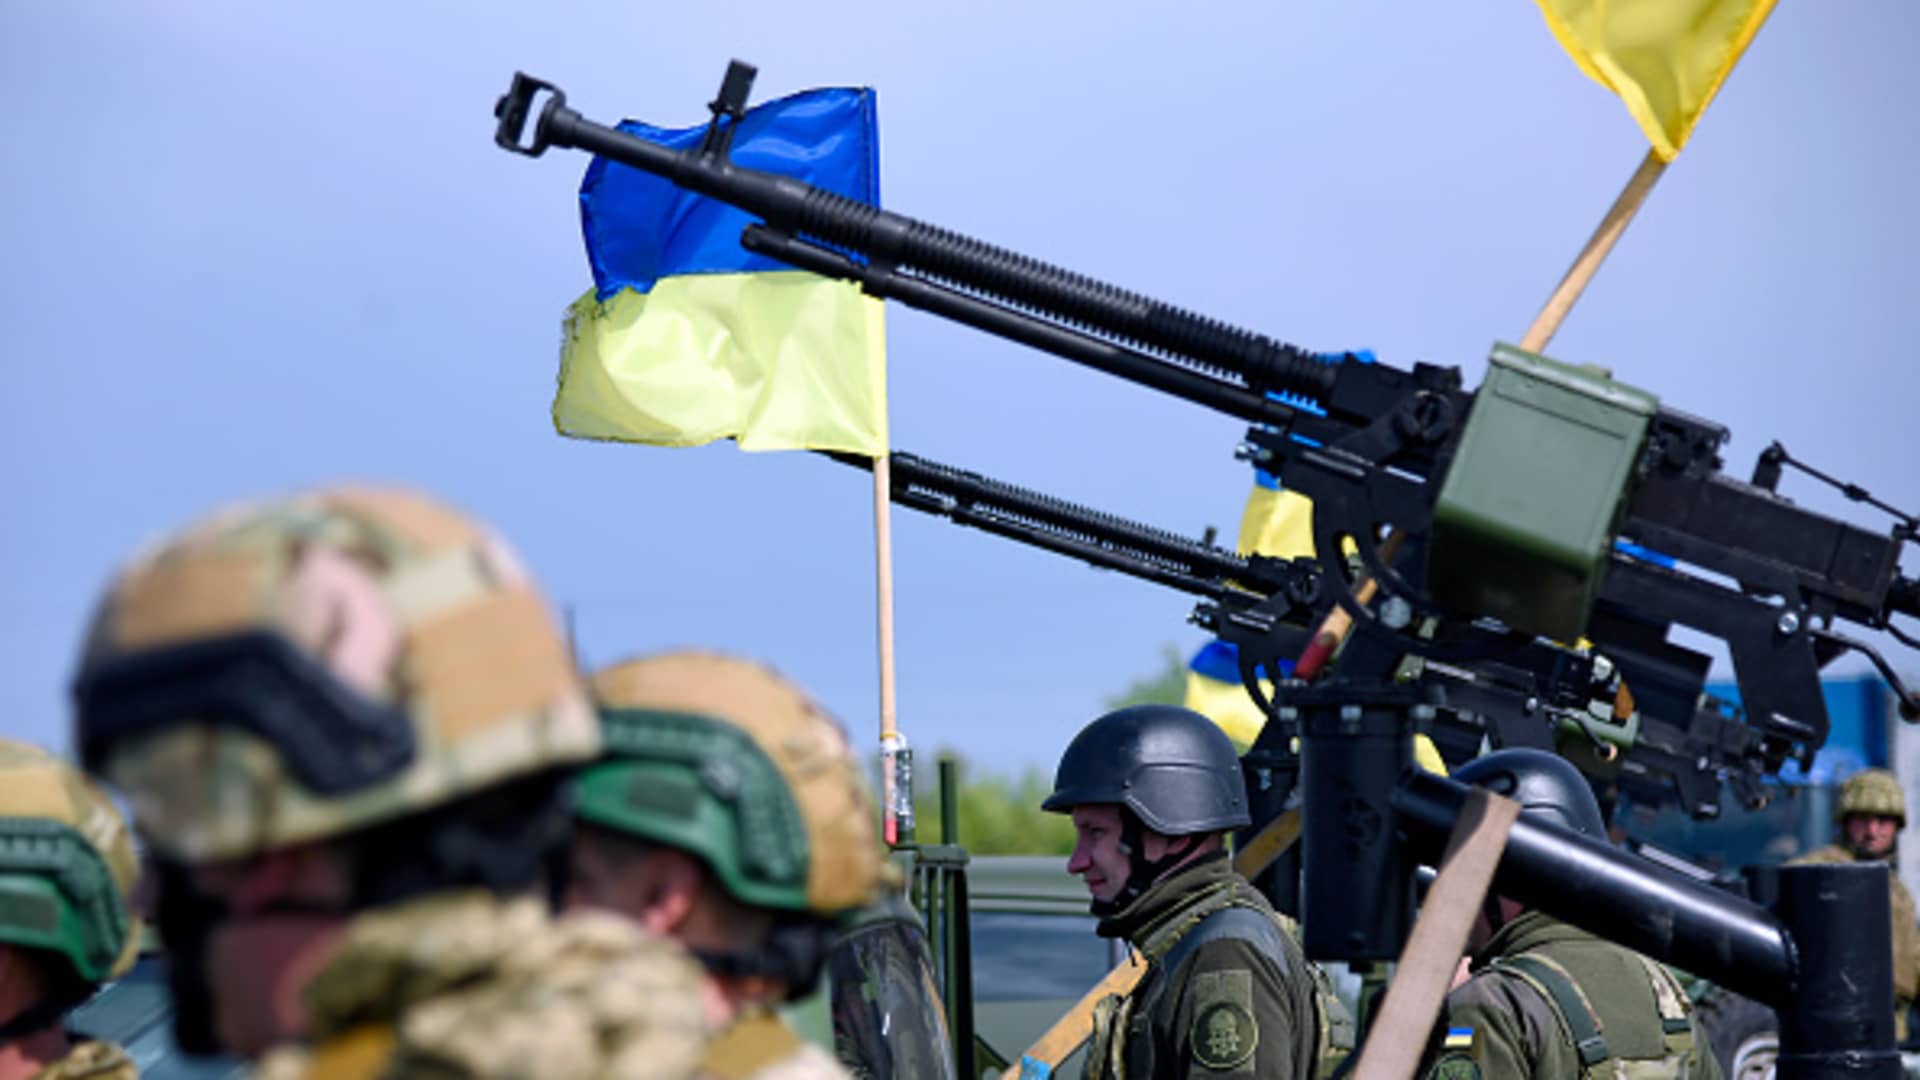 There's been much speculation as to when Ukraine's much-vaunted counteroffensive will begin, with Kyiv said to have delayed the start as it awaited more weaponry from its international allies.